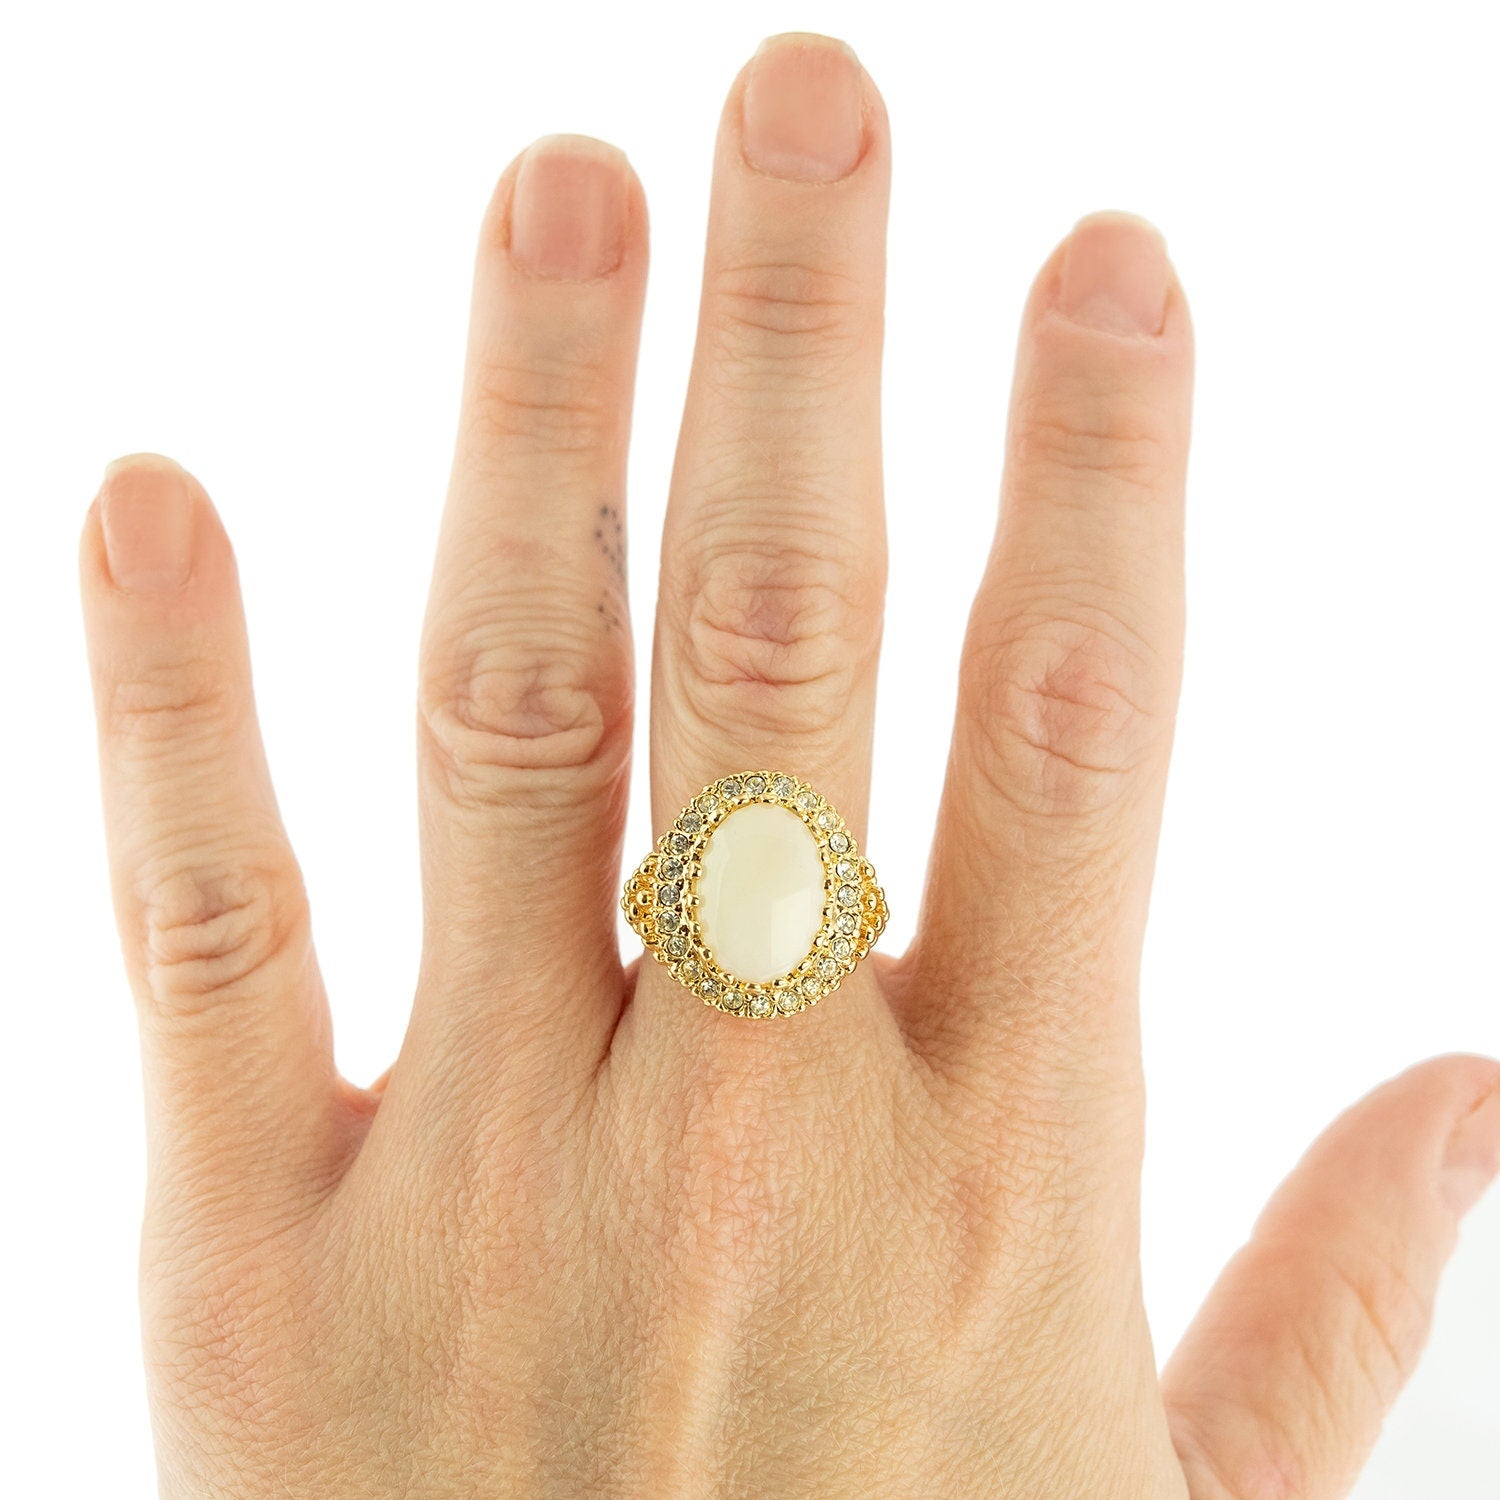 Vintage Ring Genuine Opal and Clear Crystal Ring Edwardian Style 18k Gold Ring R169 - Limited Stock - Never Worn